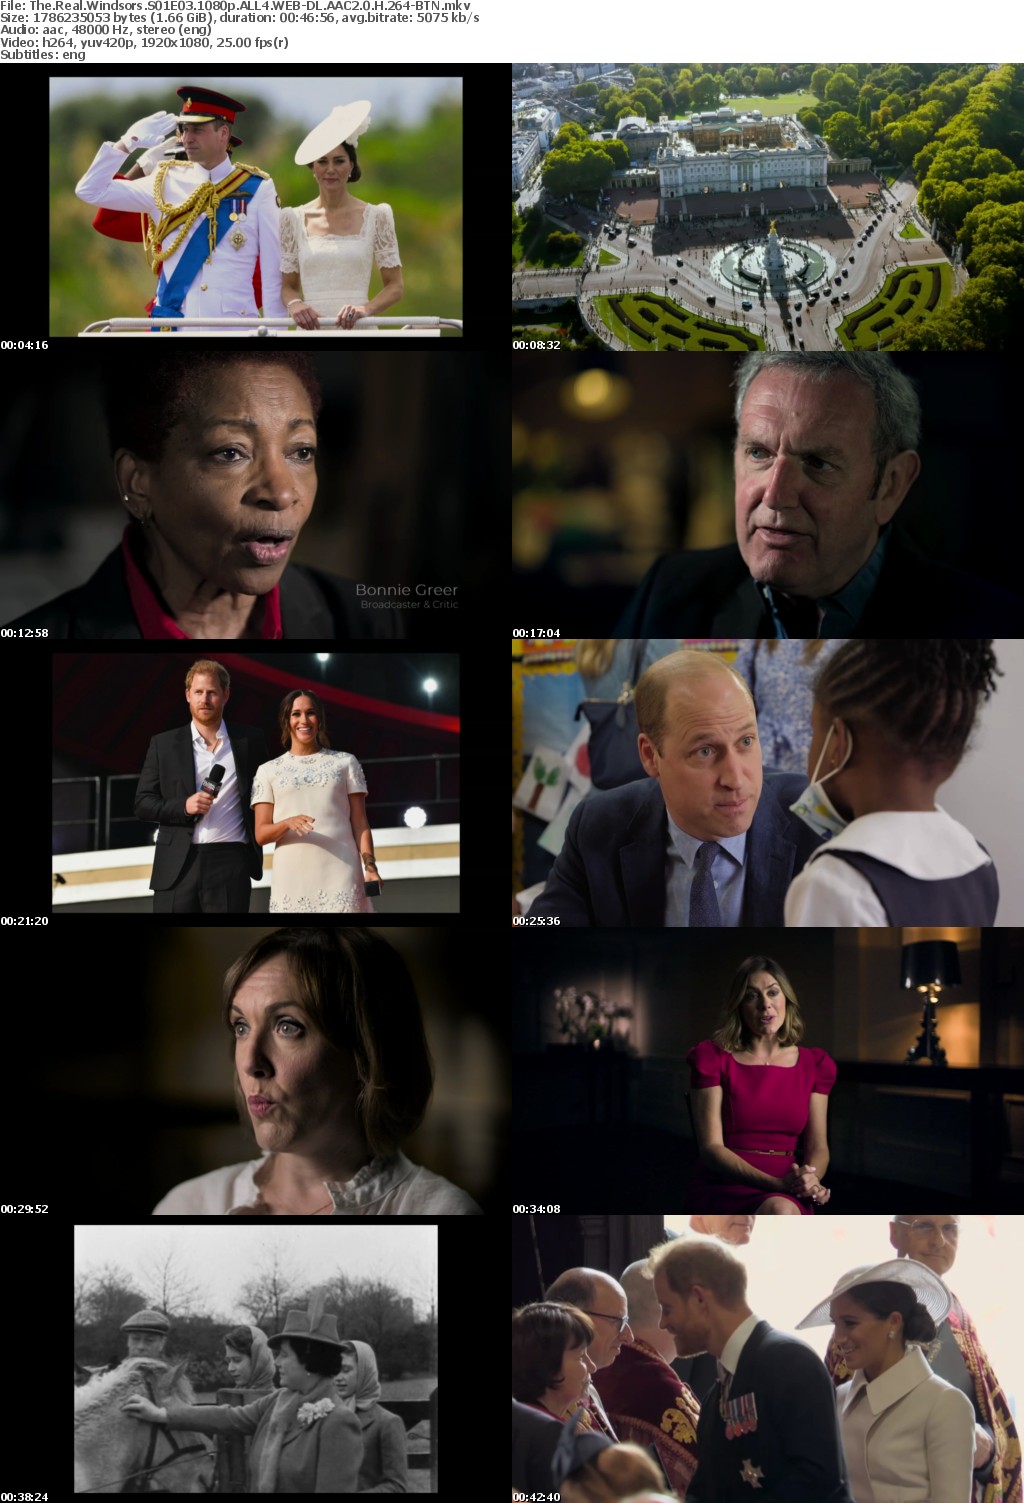 The Real Windsors S01 1080p ALL4 WEBRip AAC2 0 x264-BTN